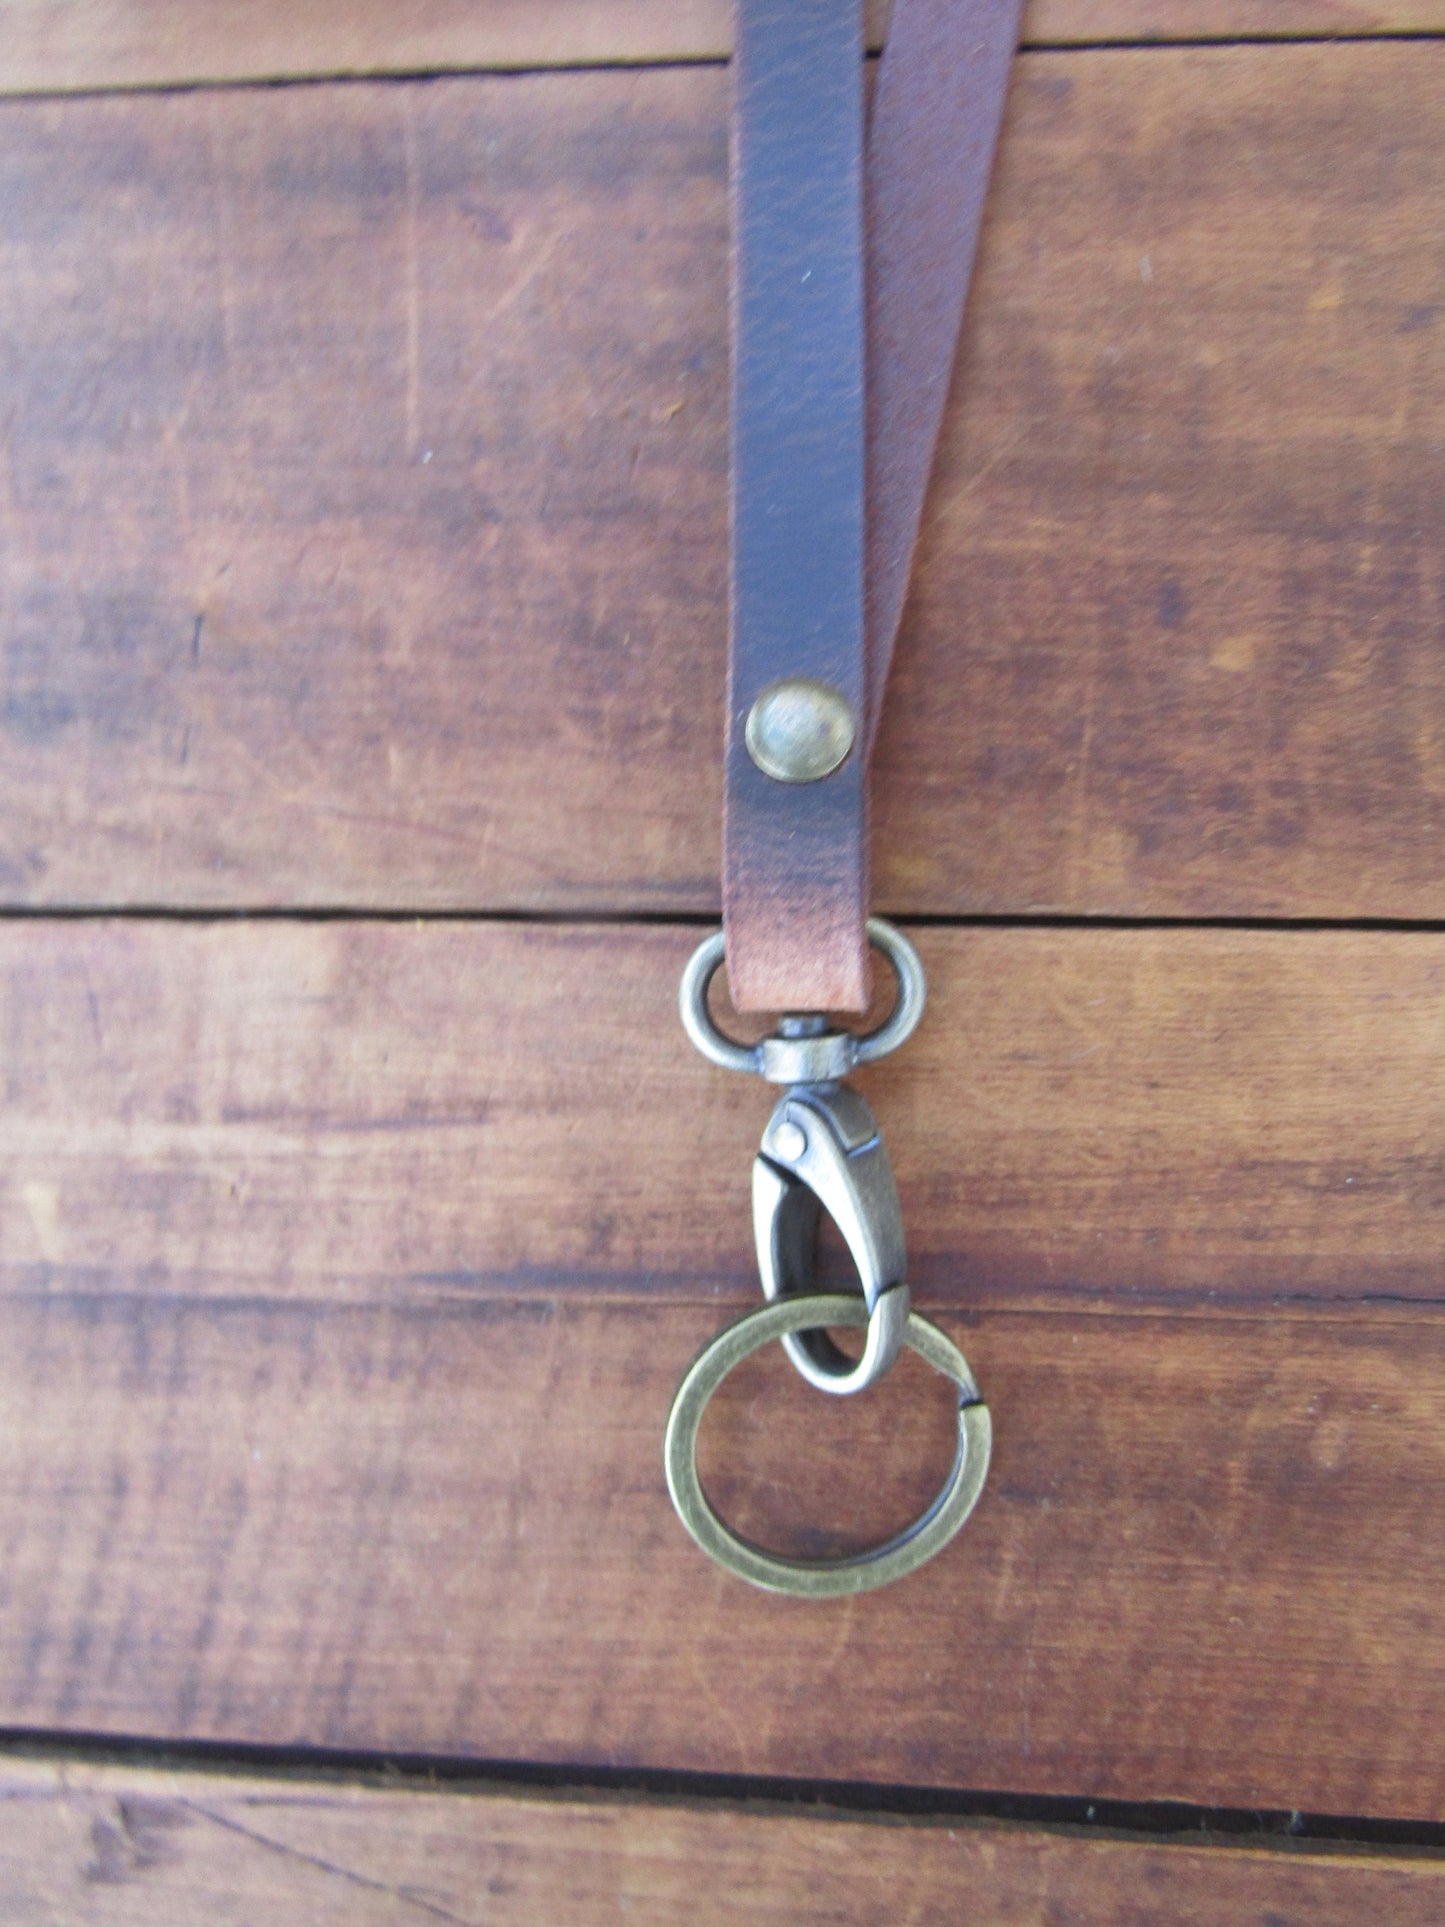 Leather Lanyard Teacher Lanyard Leather Lanyard For Keys  Lanyard Keychain Lanyard For ID Badge  Gift for him Gift for her